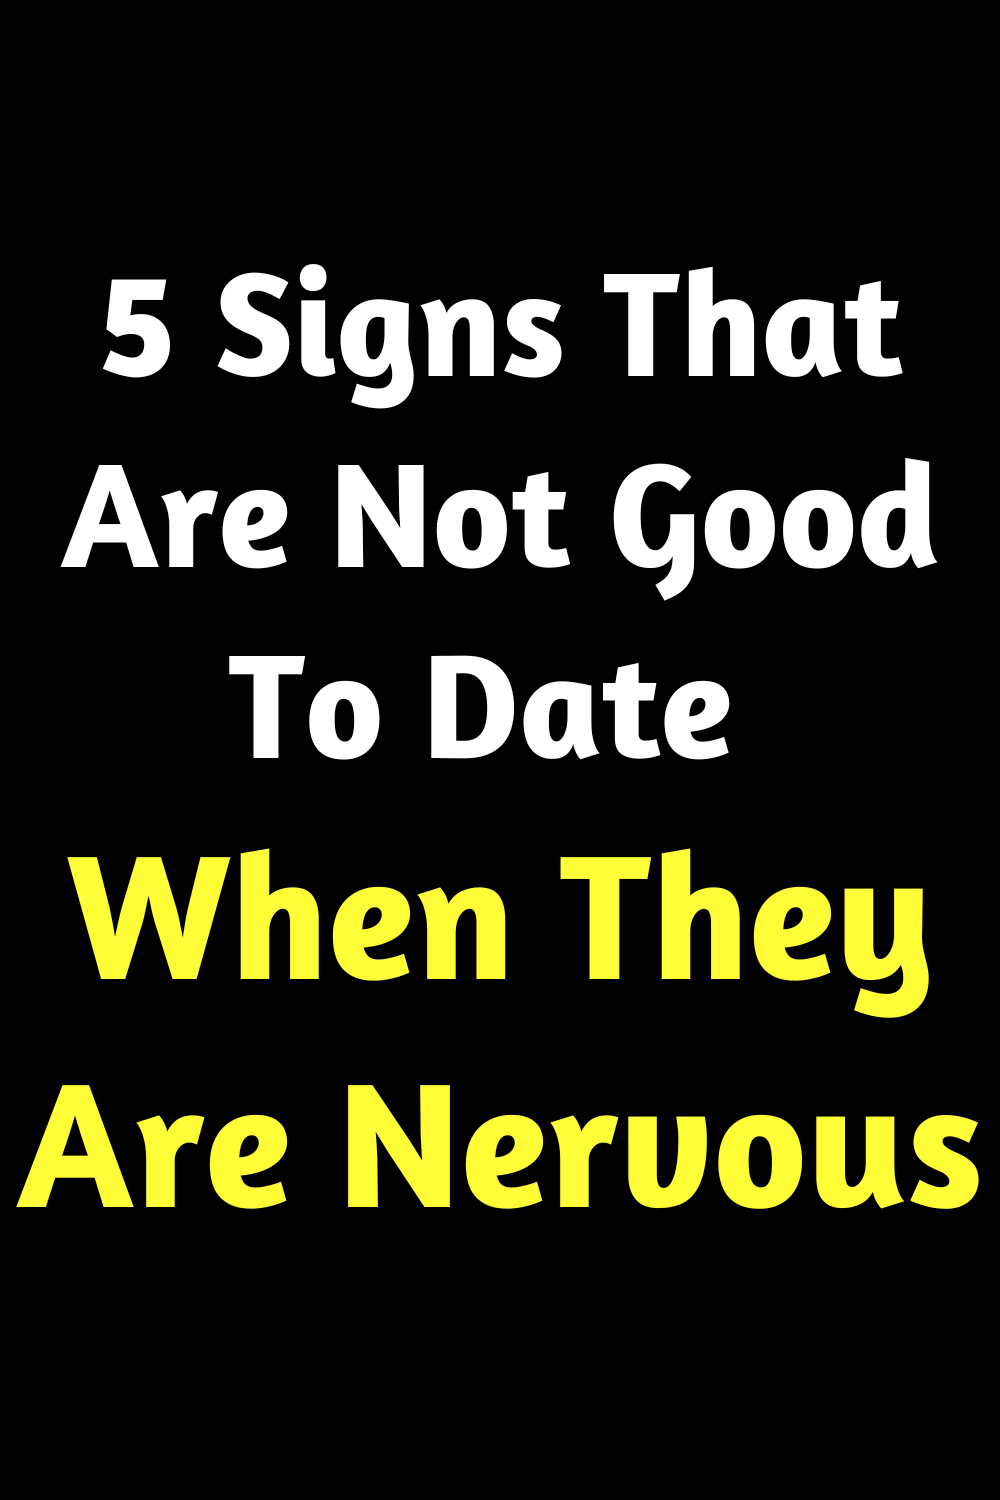 5 Signs That Are Not Good To Date When They Are Nervous